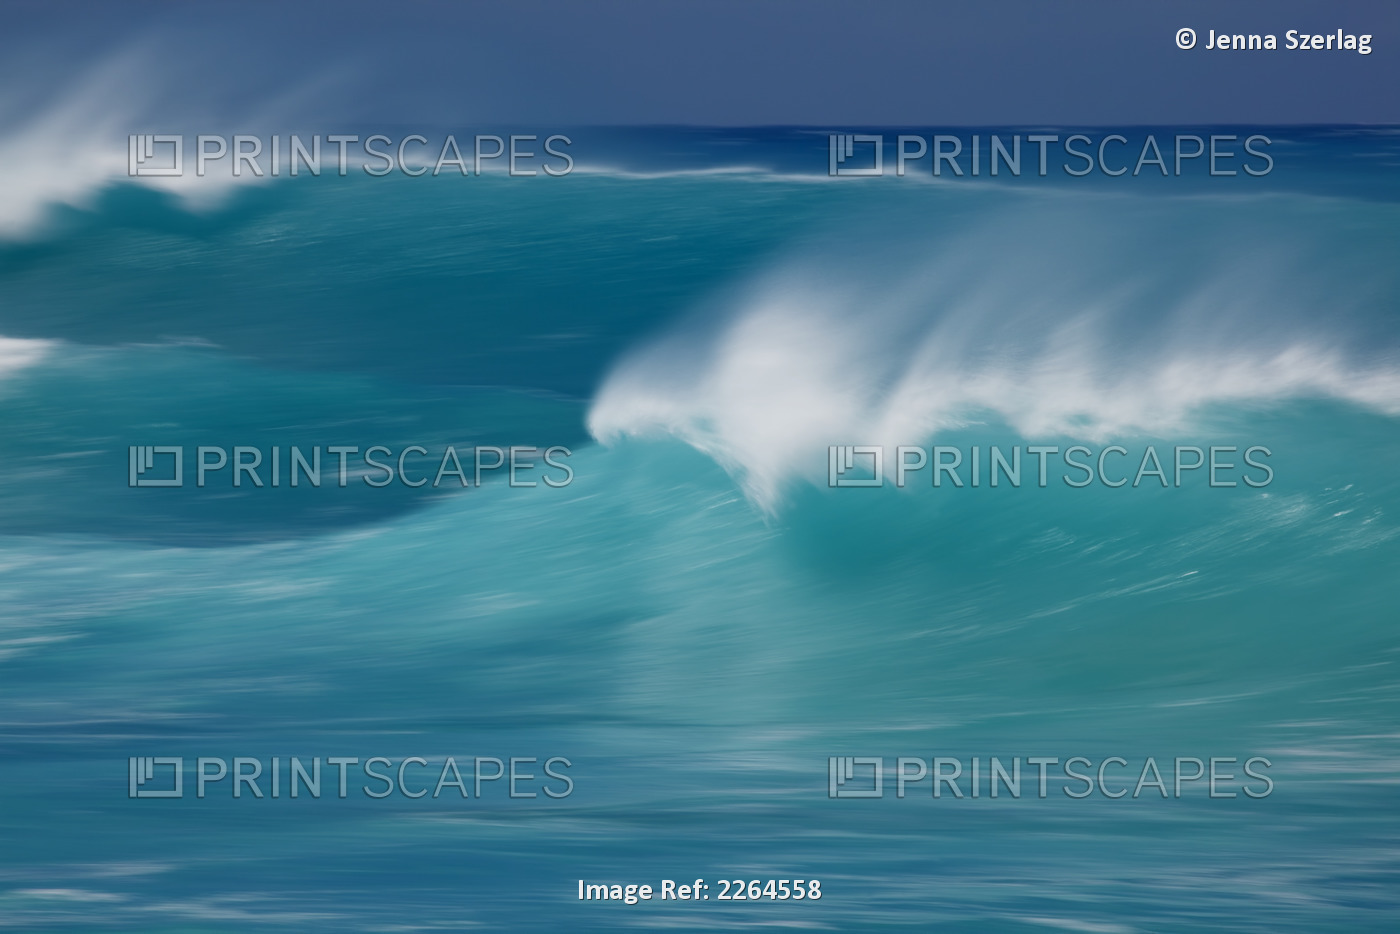 Hawaii, Maui, A Blurred Image Of A Soft Wave Breaking.